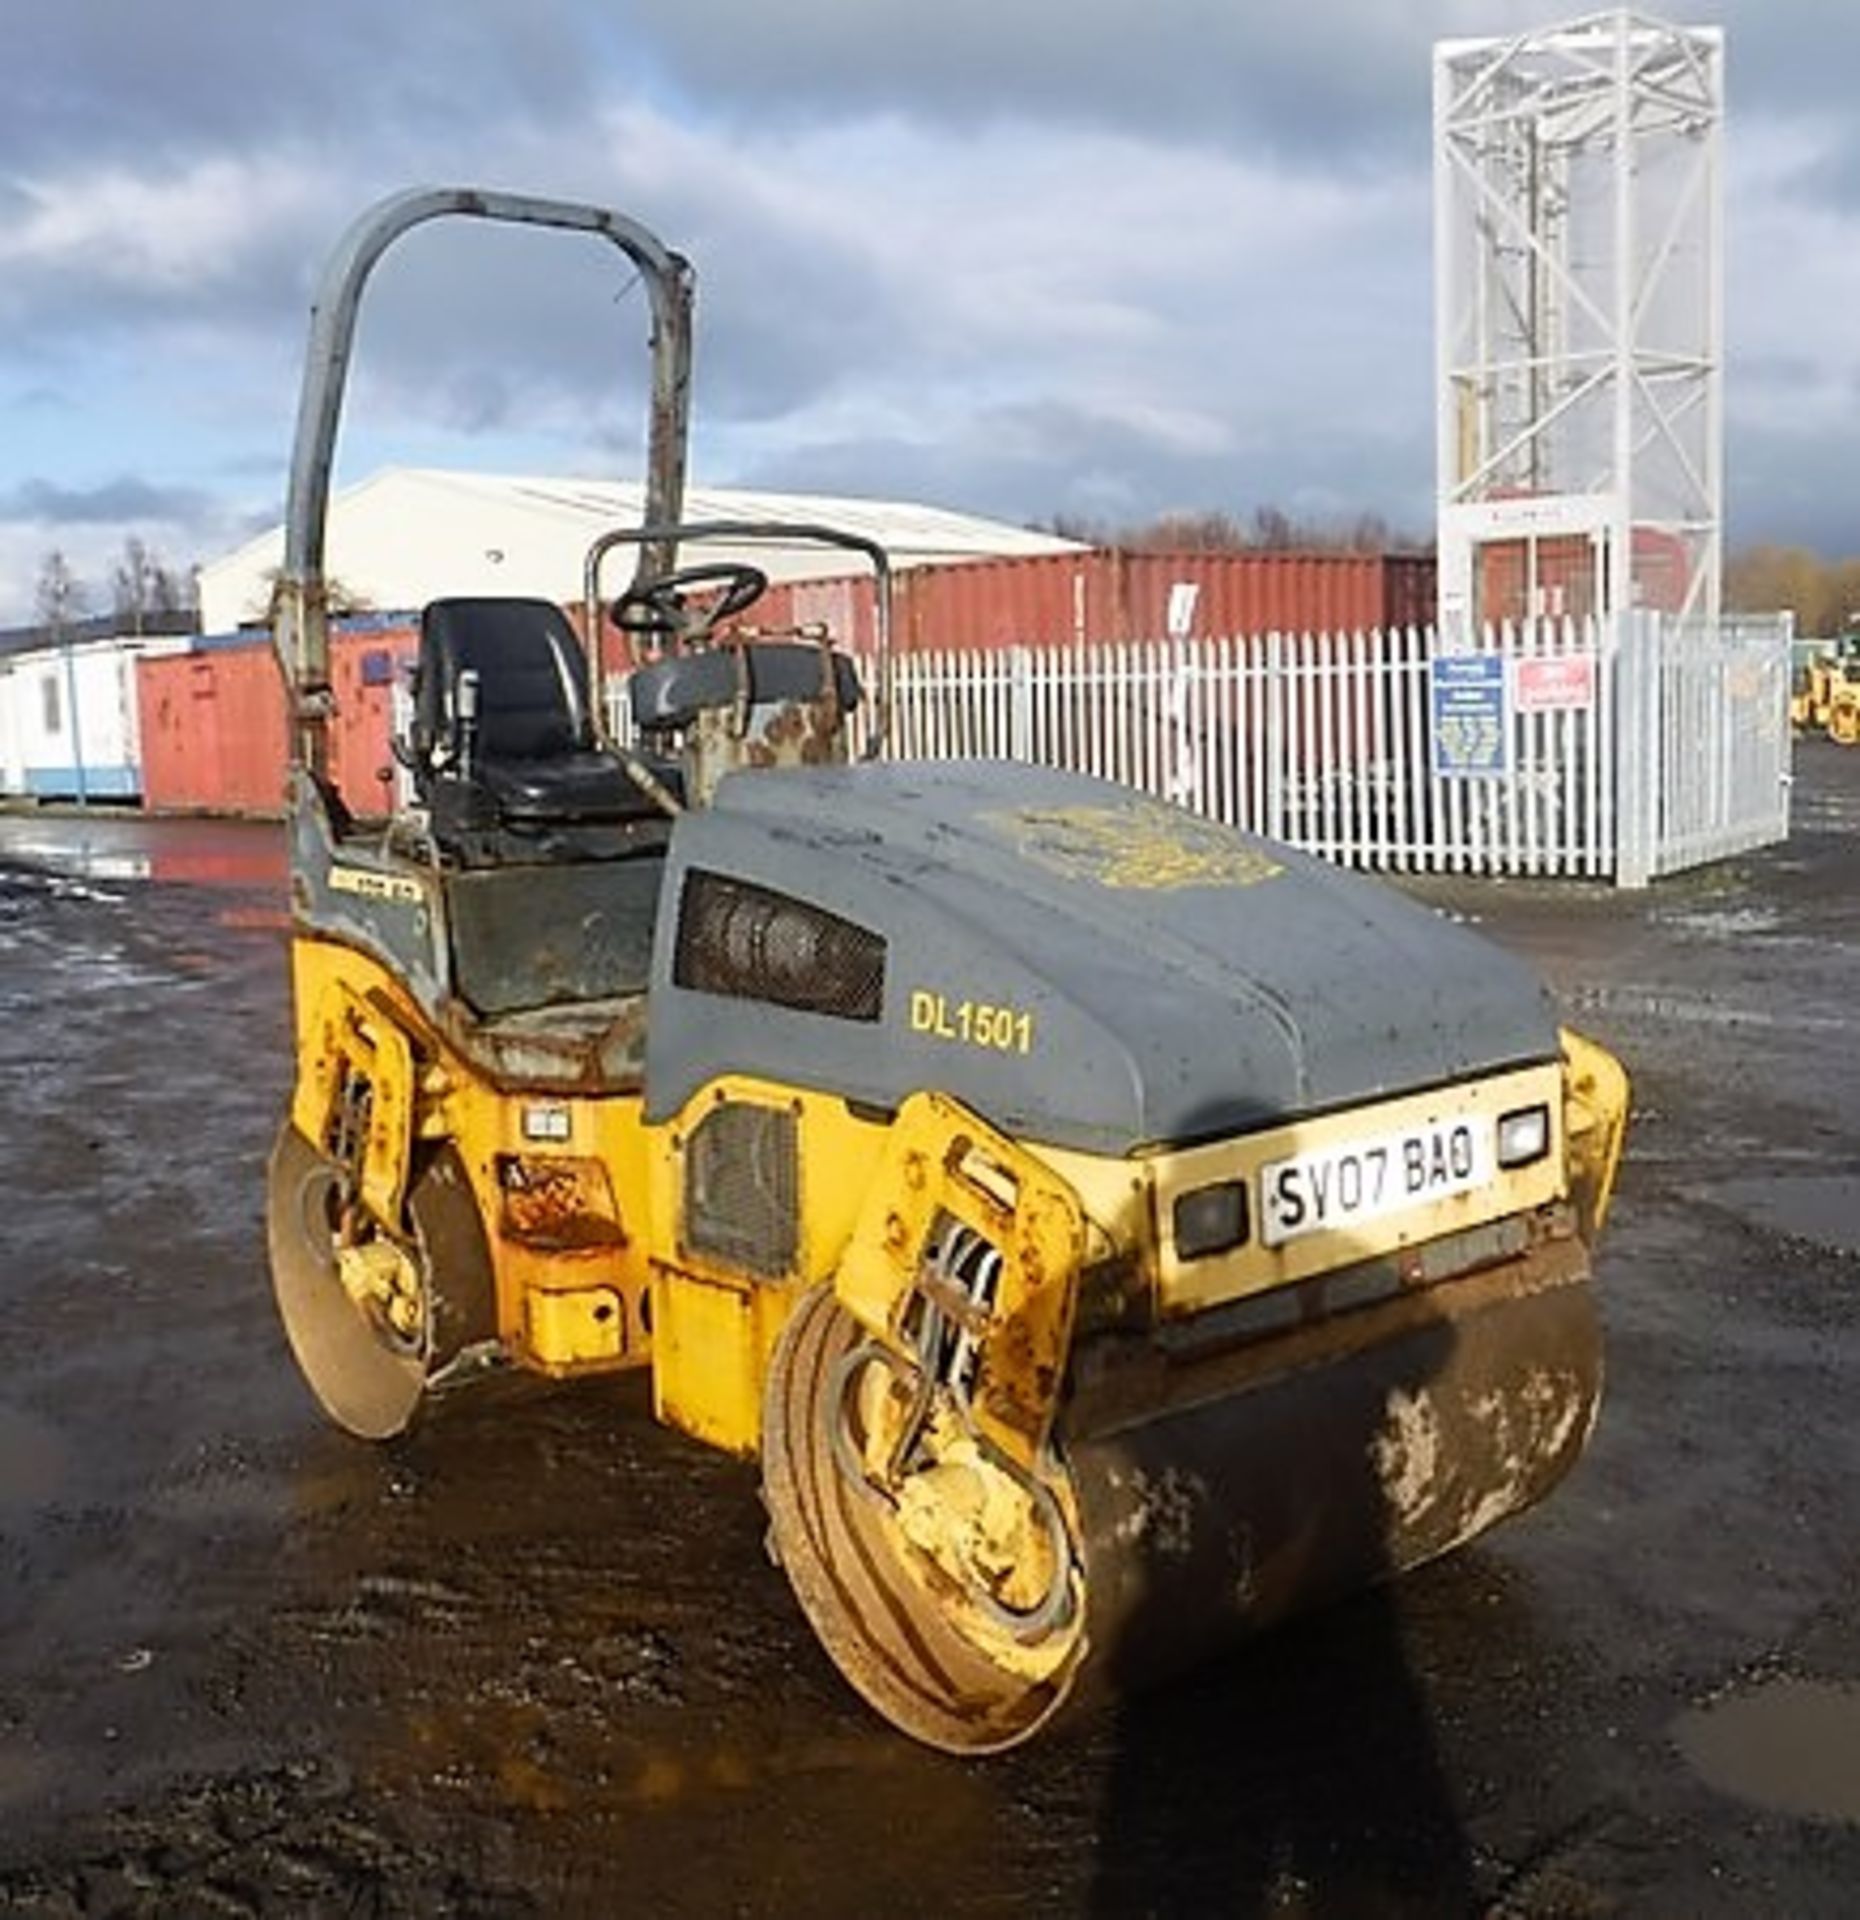 2006 BOMAG roller BW120AD-4 REG NO SV07 BAO 1022 hrs (not verified)SN - 101880023247 - Image 3 of 13